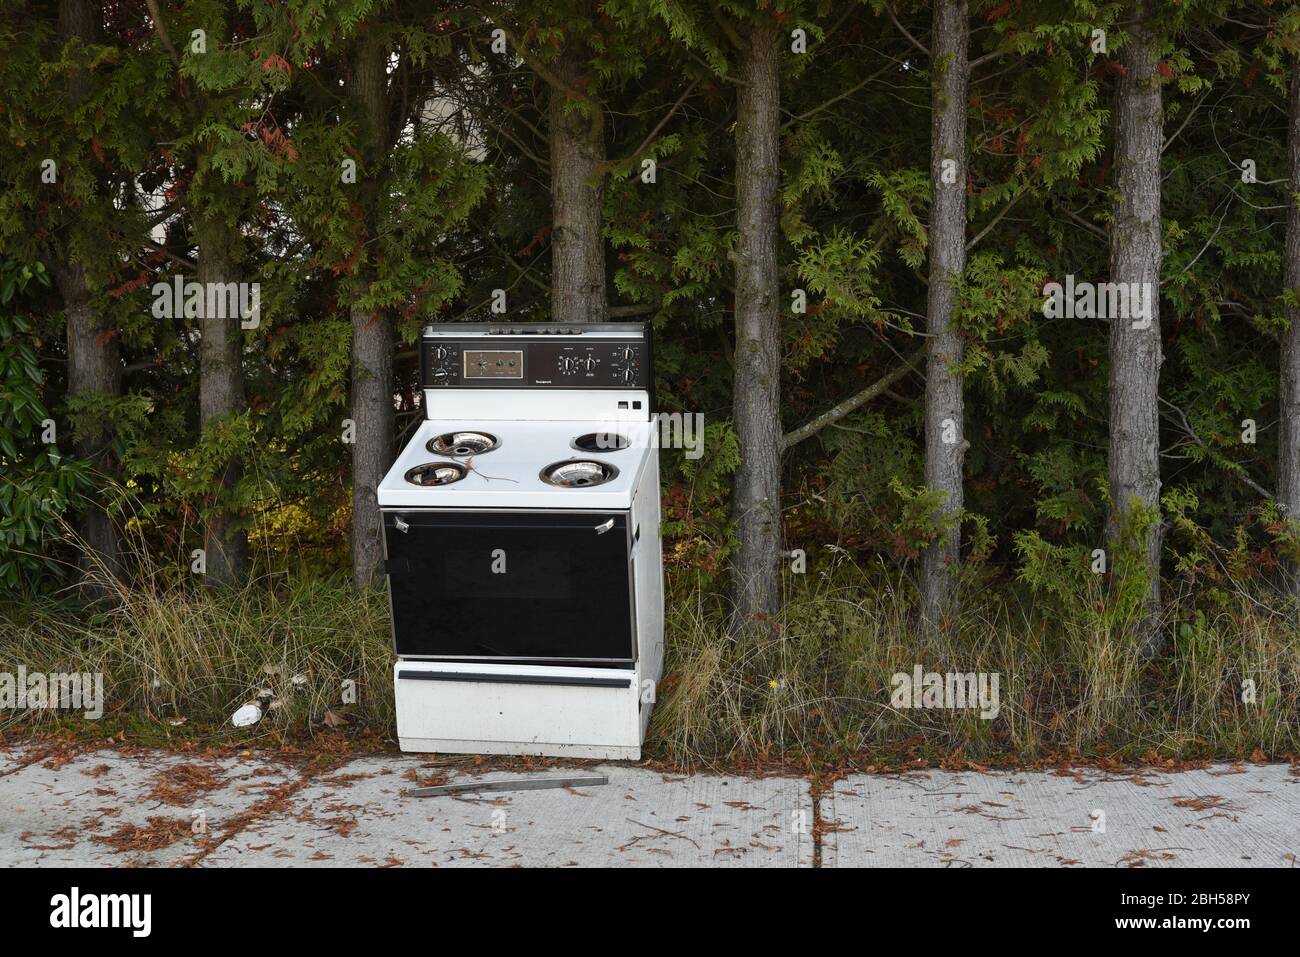 An abandoned old stove and oven is abandoned on a sidewalk in front of a row of trees in Victoria, British Columbia, Canada Stock Photo